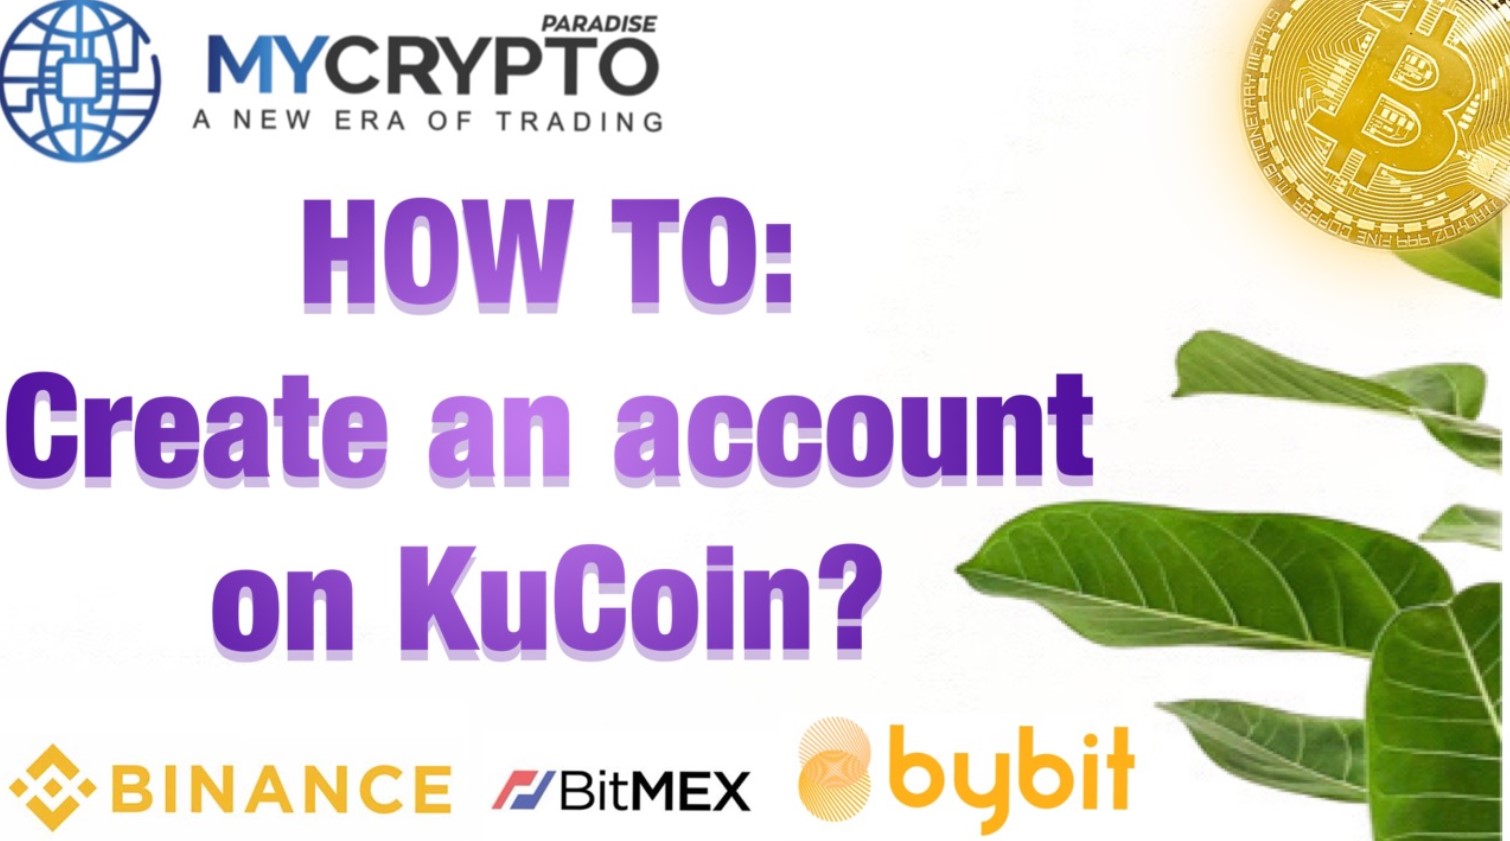 How to create an account on KuCoin and start trading like a PRO